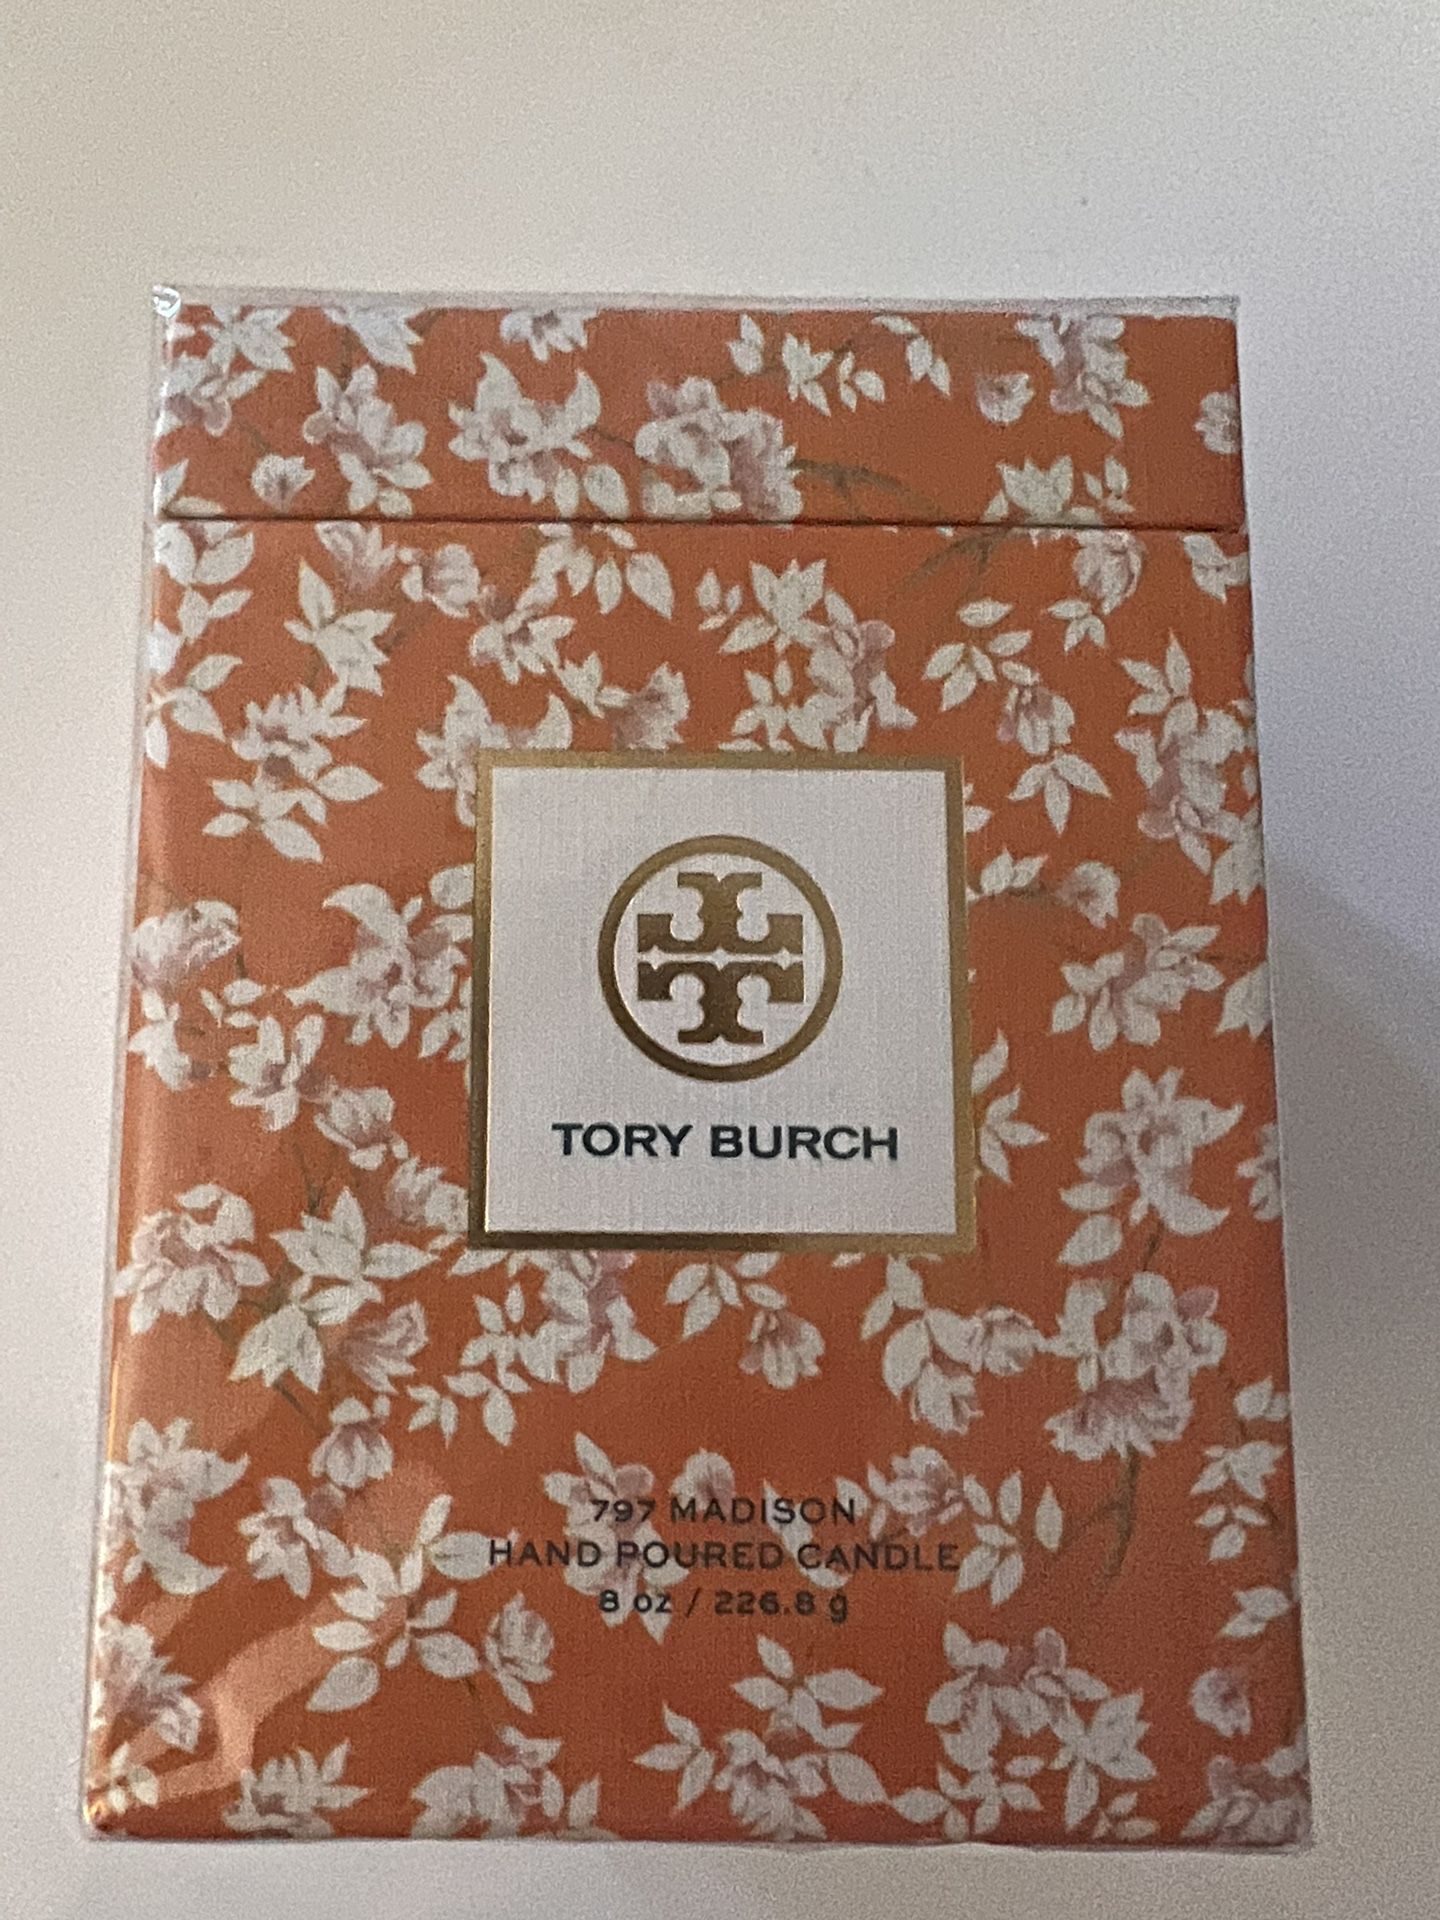 Tory Burch Hand Poured Pillar Candle - New In Box for Sale in New York, NY  - OfferUp